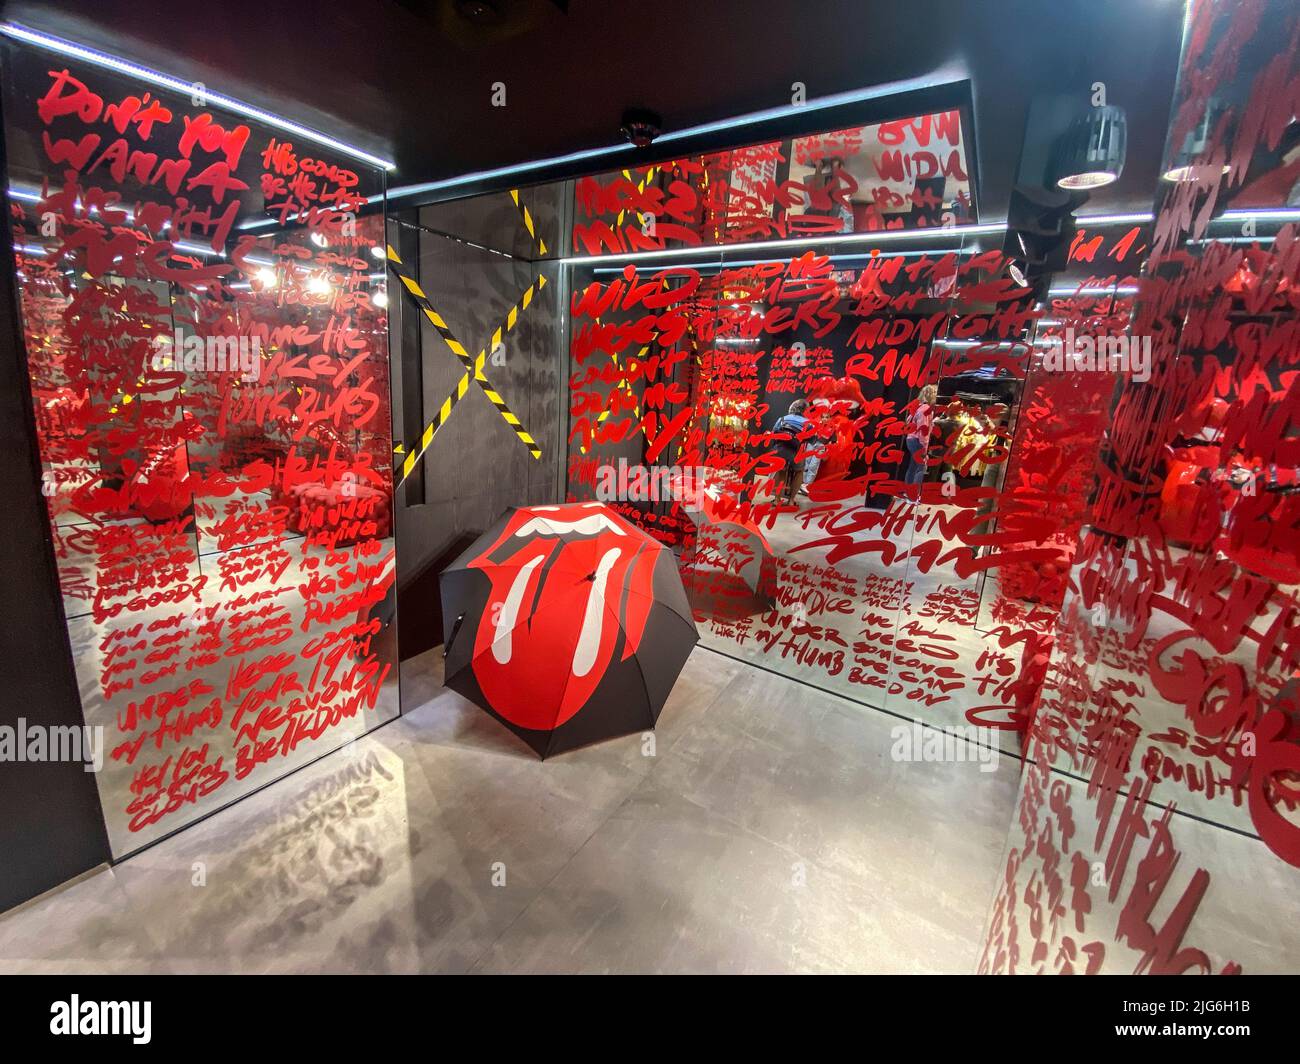 THE ROLLING STONES UK CARNABY ST. CONSERVARE Foto Stock